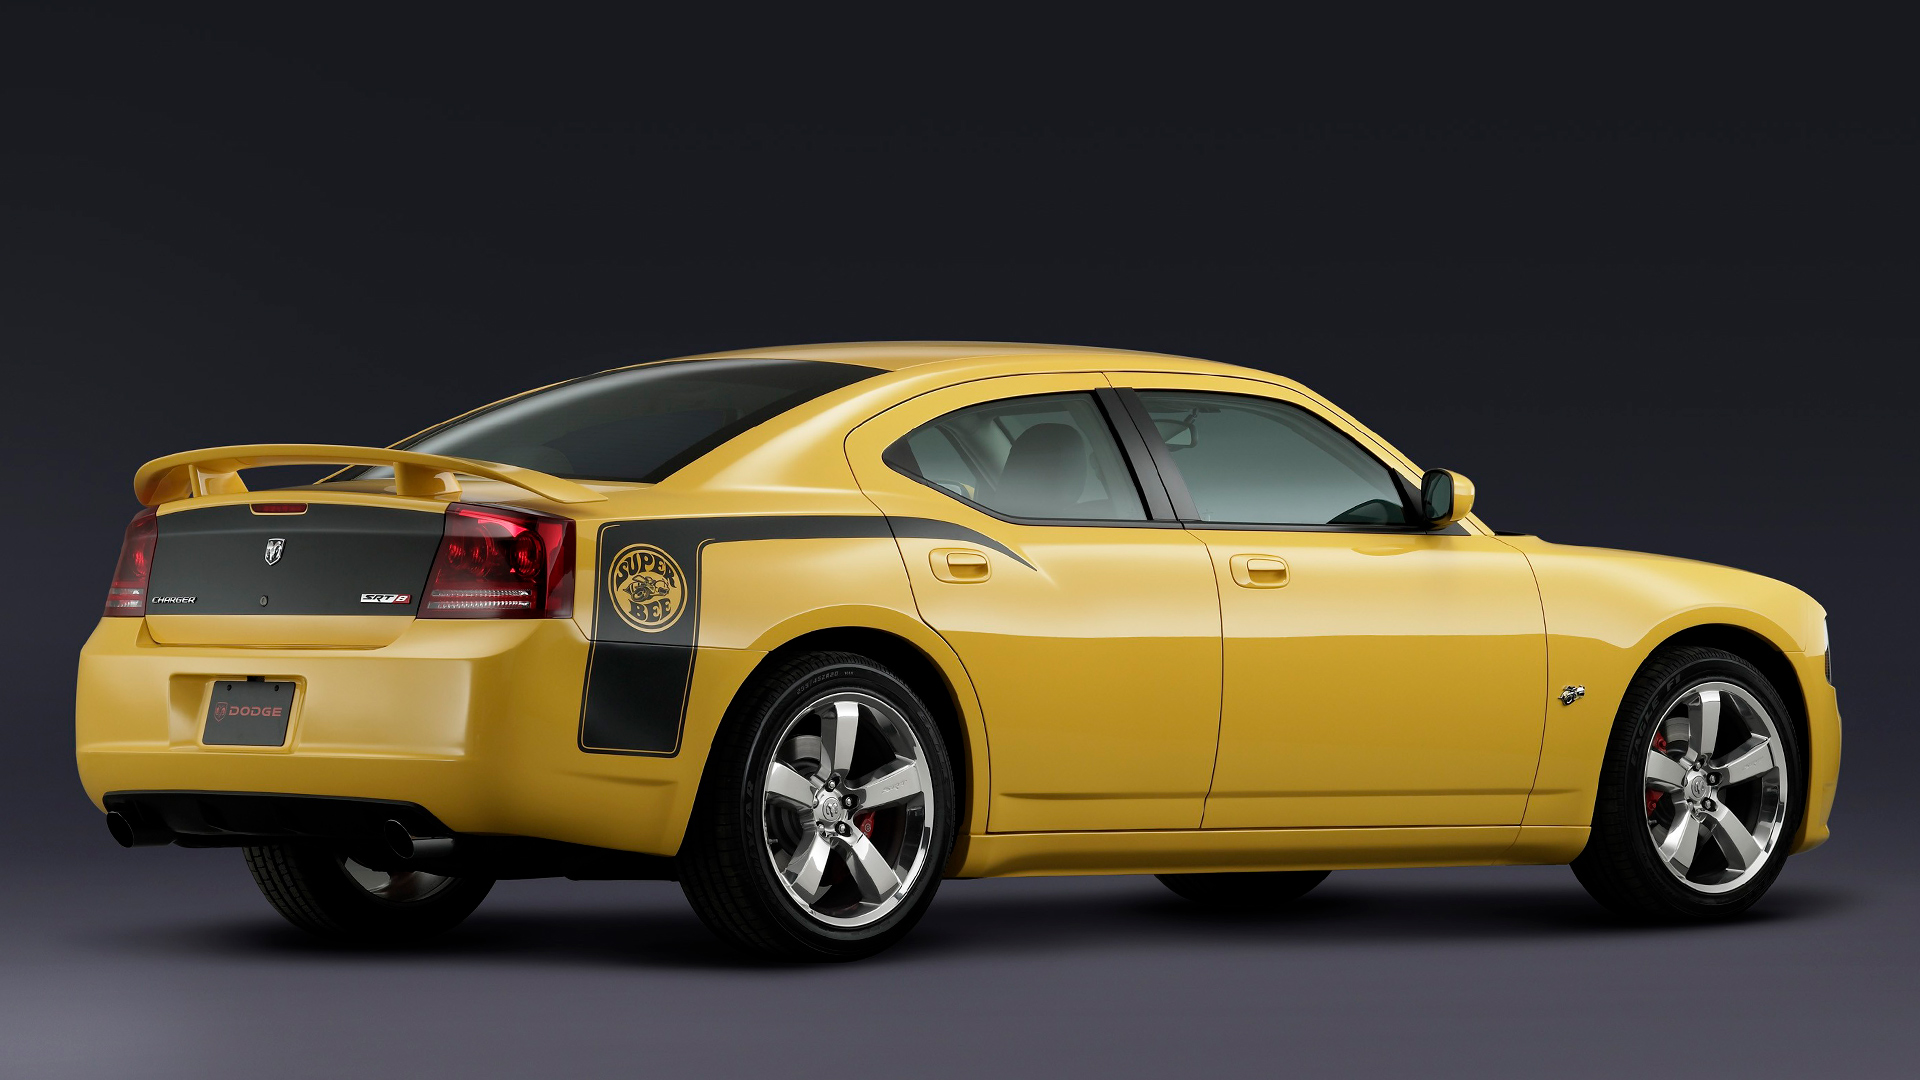 2008 Dodge Charger Super Bee